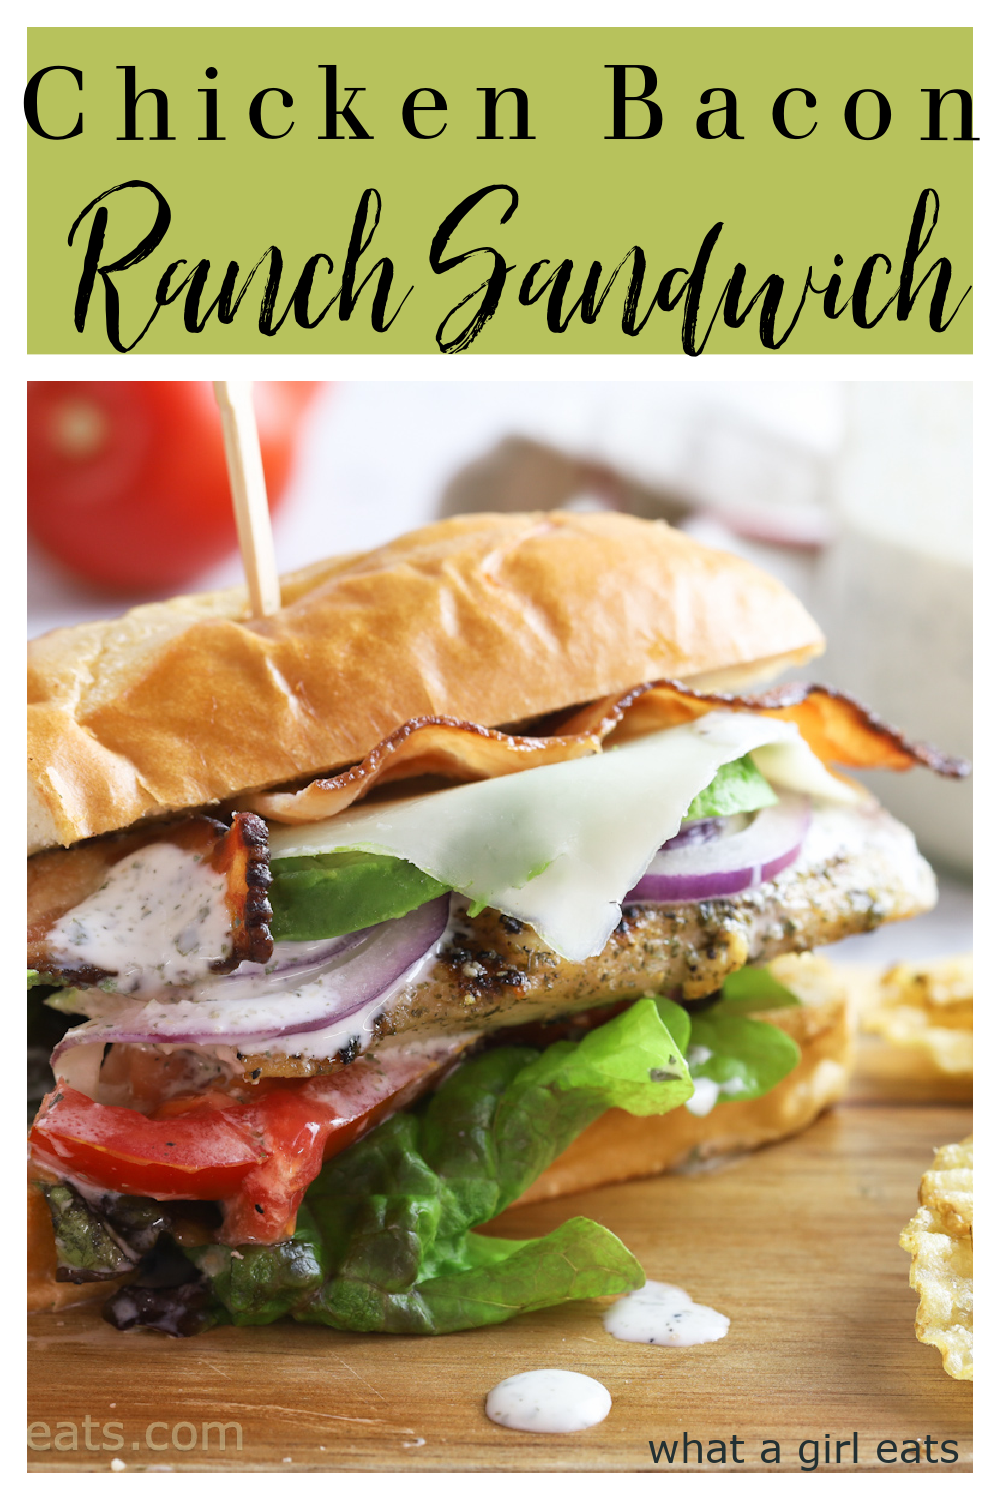 This chicken bacon ranch sandwich is packed with juicy chicken, crispy bacon, avocado and cheese drizzled in homemade ranch dressing.